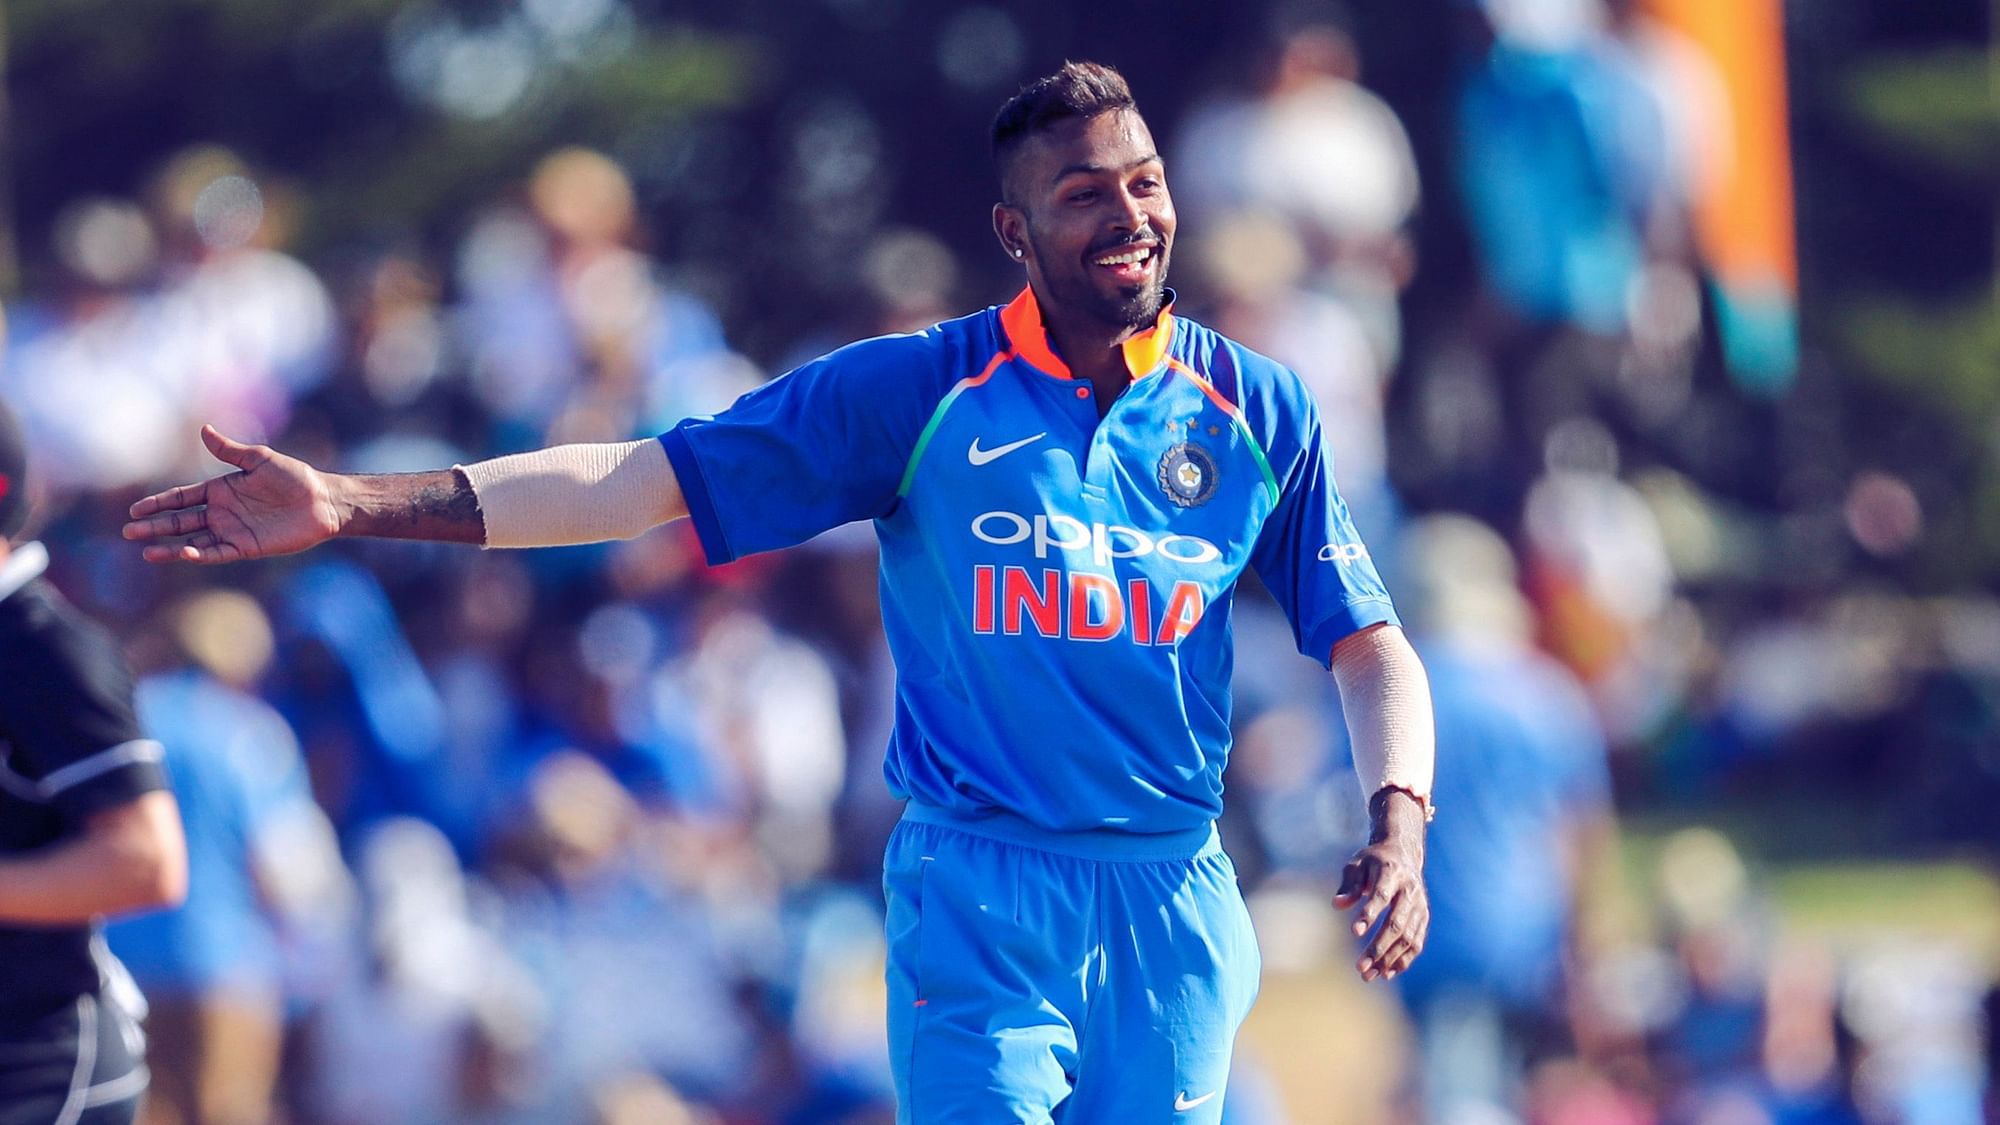 Hardik Pandya helped the Indian team close out a 4-1 ODI series victory over New Zealand on Sunday.&nbsp;